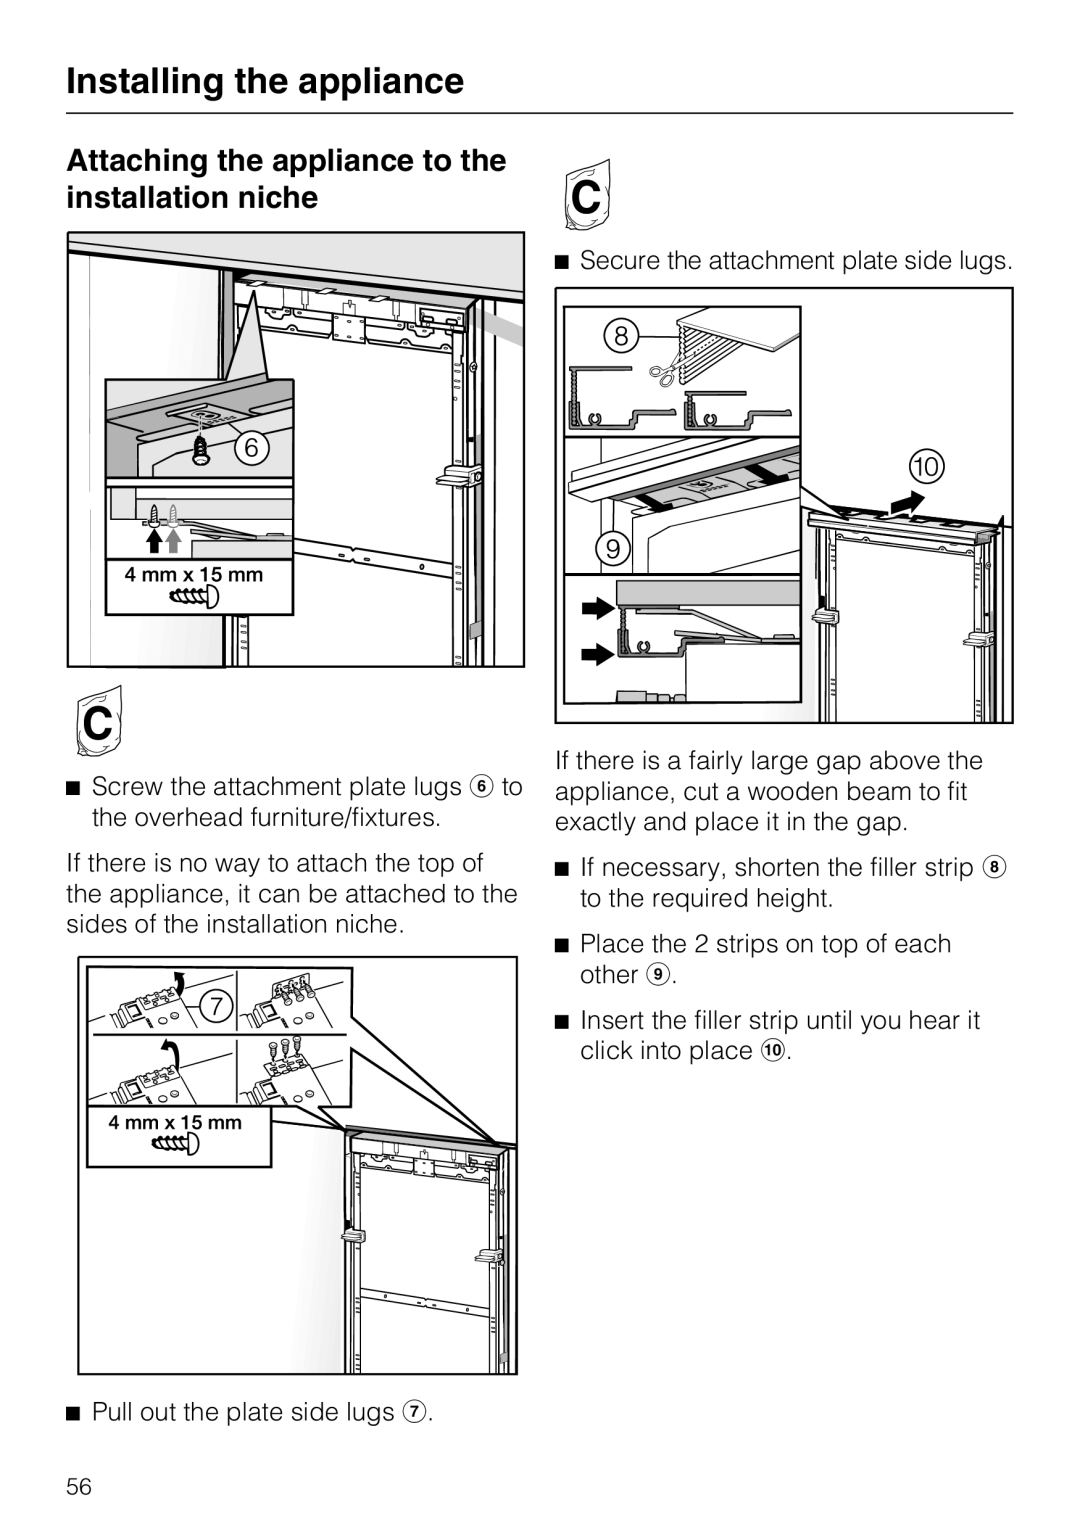 Miele 09 920 570 installation instructions Attaching the appliance to the installation niche, Installing the appliance 